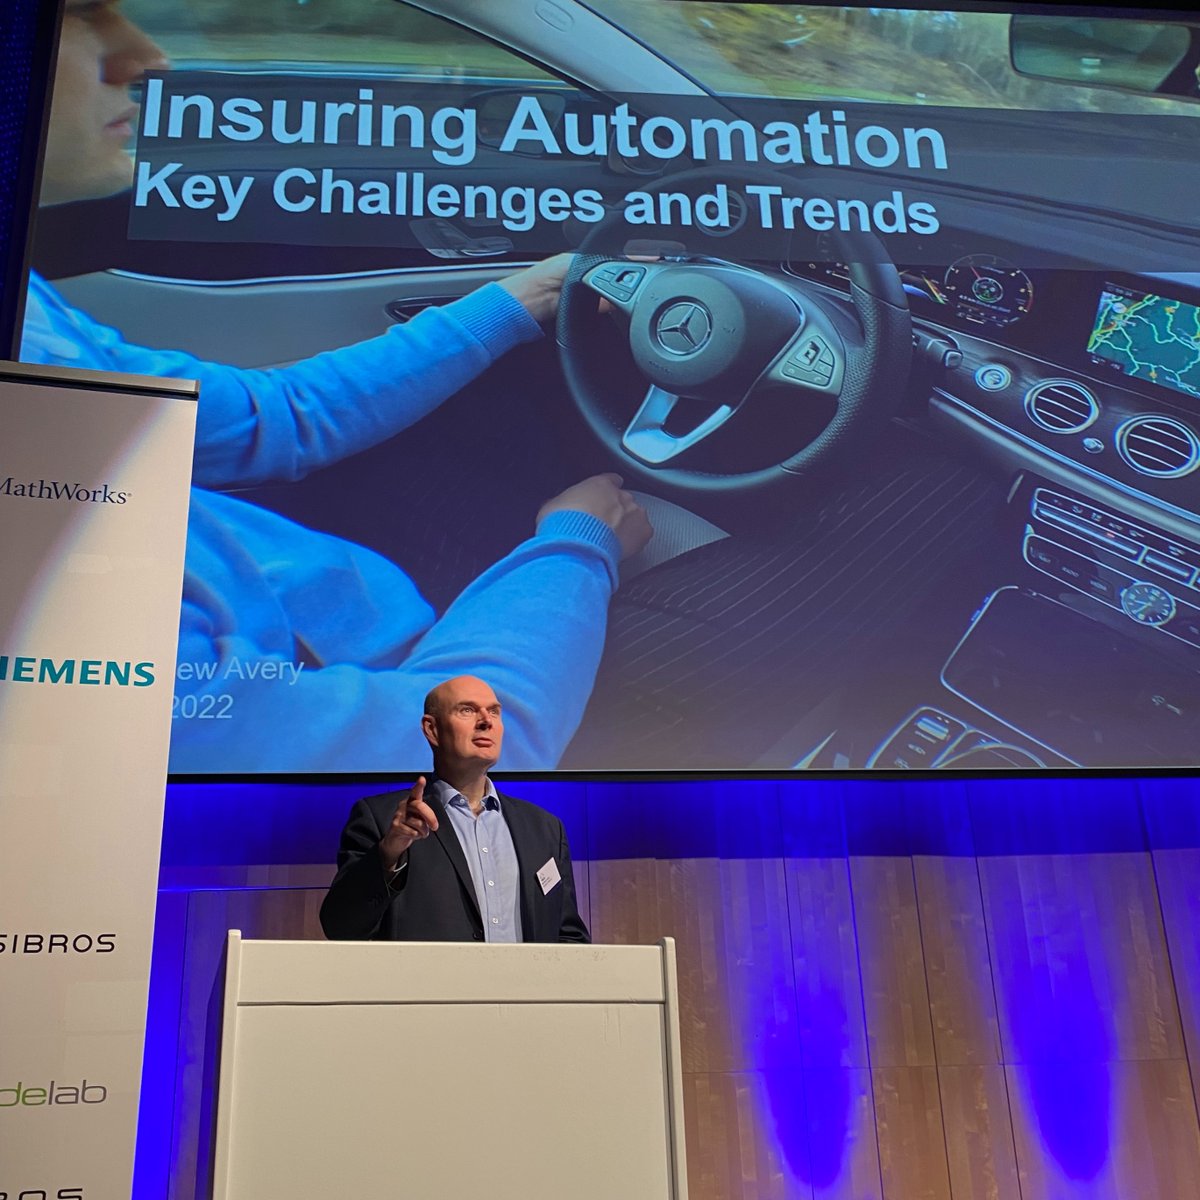 Our chief research strategy officer, Matthew Avery, is speaking at the VECS conference today in Gothenburg, and is addressing how the role of the consumer and insurer as key stakeholders must be considered if we are to promote the safe and speedy adoption of new technologies. https://t.co/T7BhaYGFgX